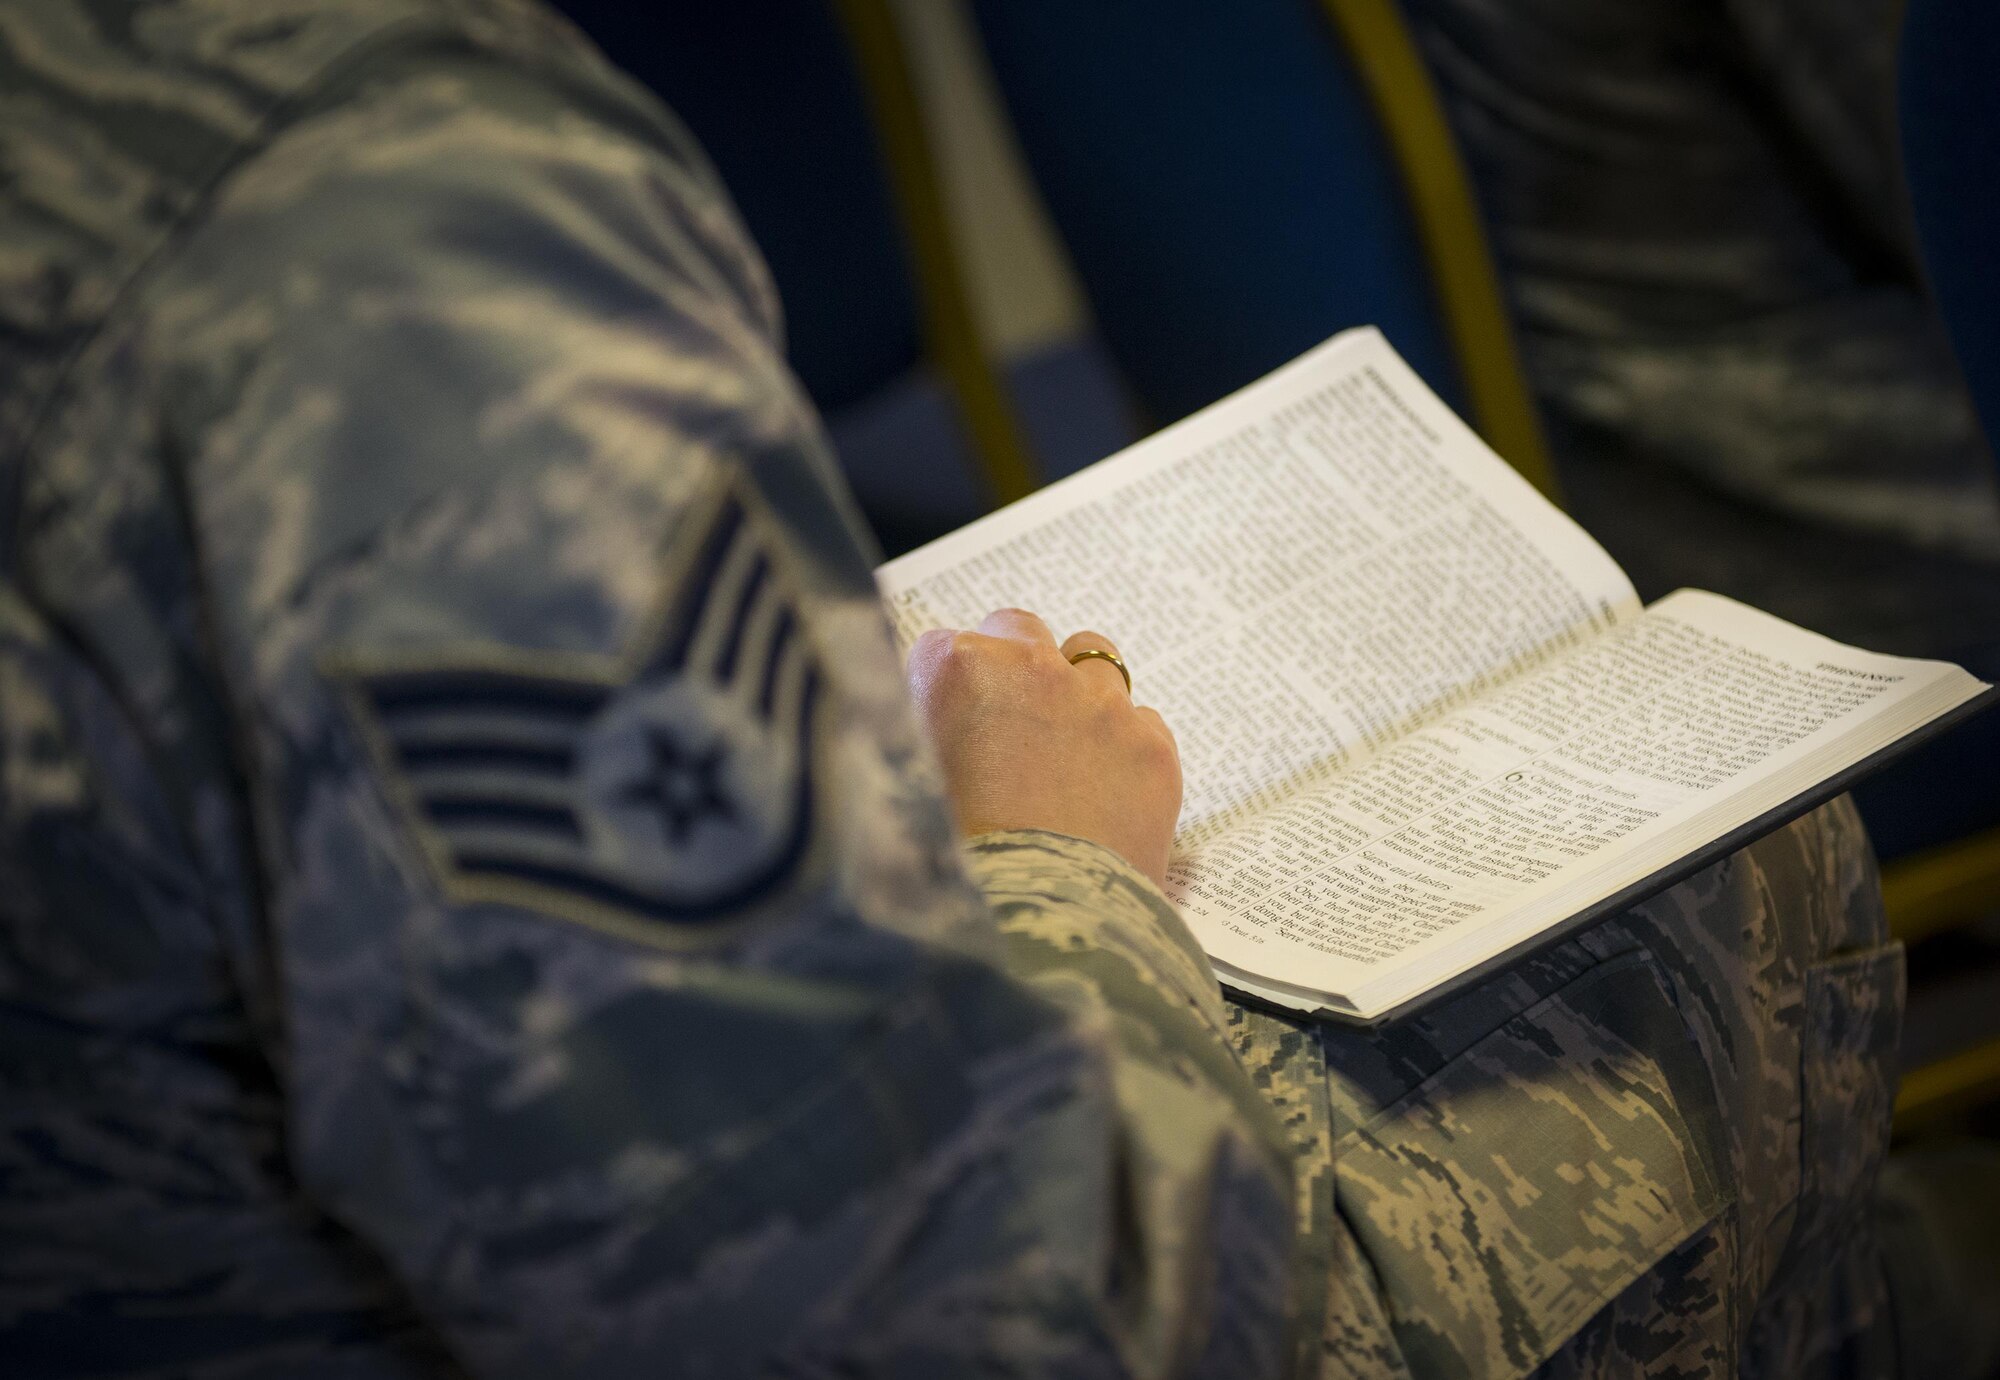 An Airman follows along with the scripture being read during the Unit Training Assembly’s chapel service April 2 at Duke Field, Fla.  The 919th Special Operations Wing’s chaplains visit all of the wing’s units quarterly to meet and talk with Airmen to let them know their spiritual and counseling services are available should the need arise.  (U.S. Air Force photo/Tech. Sgt. Sam King)